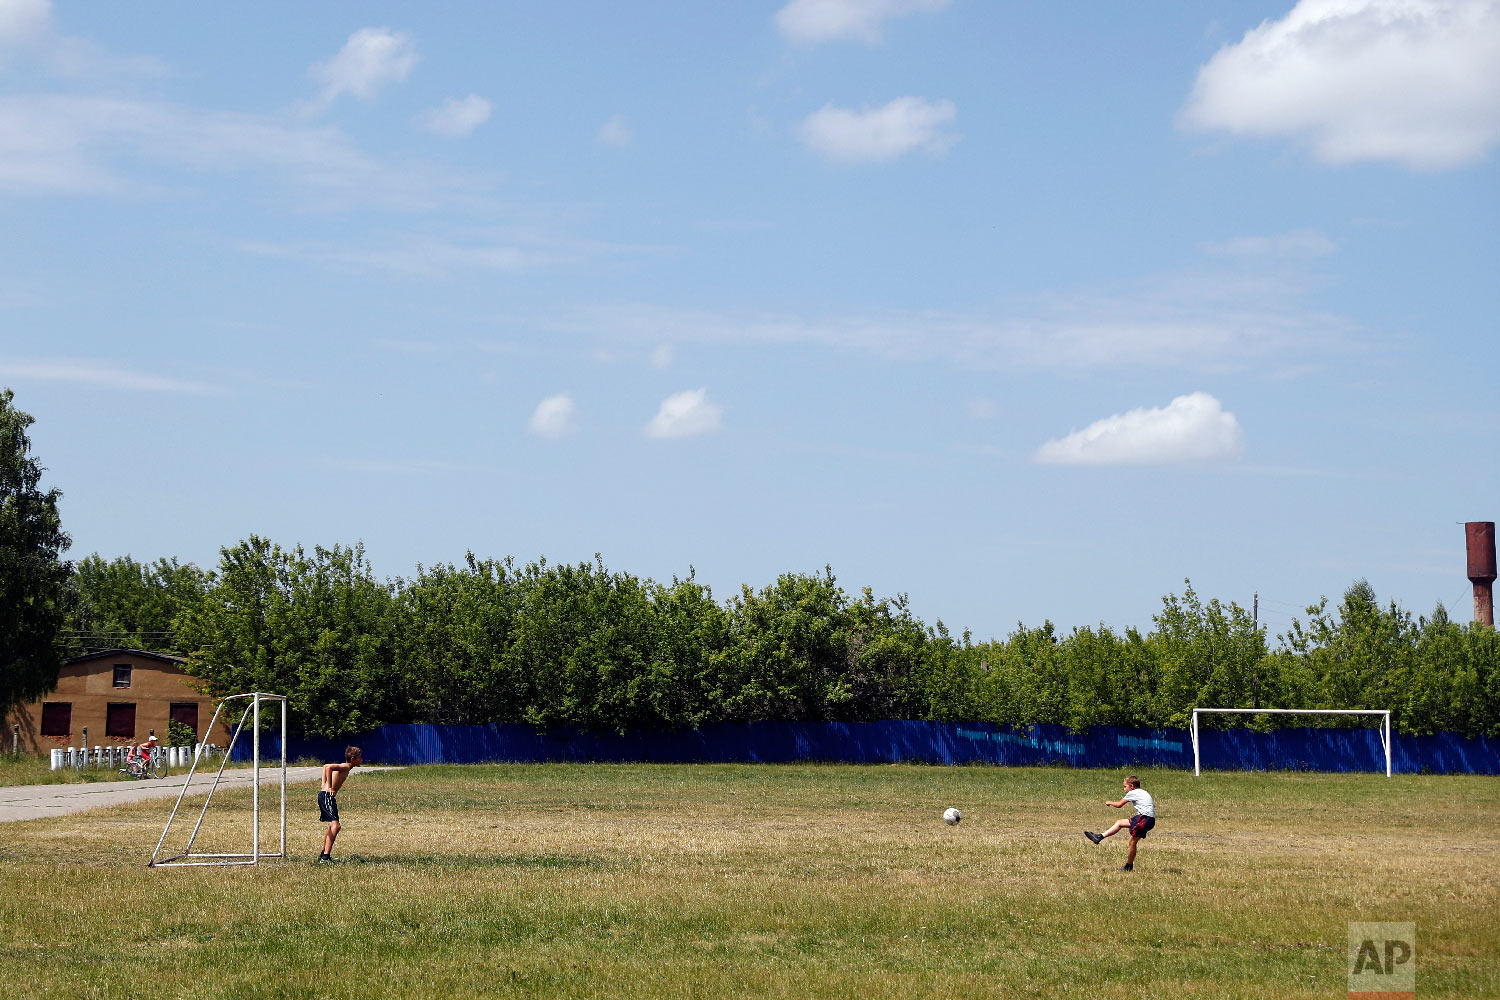  Children play with a ball in a soccer field in Kochkurovo village, outside Saransk, Russia on June 27, 2018. (AP Photo/Pavel Golovkin) 